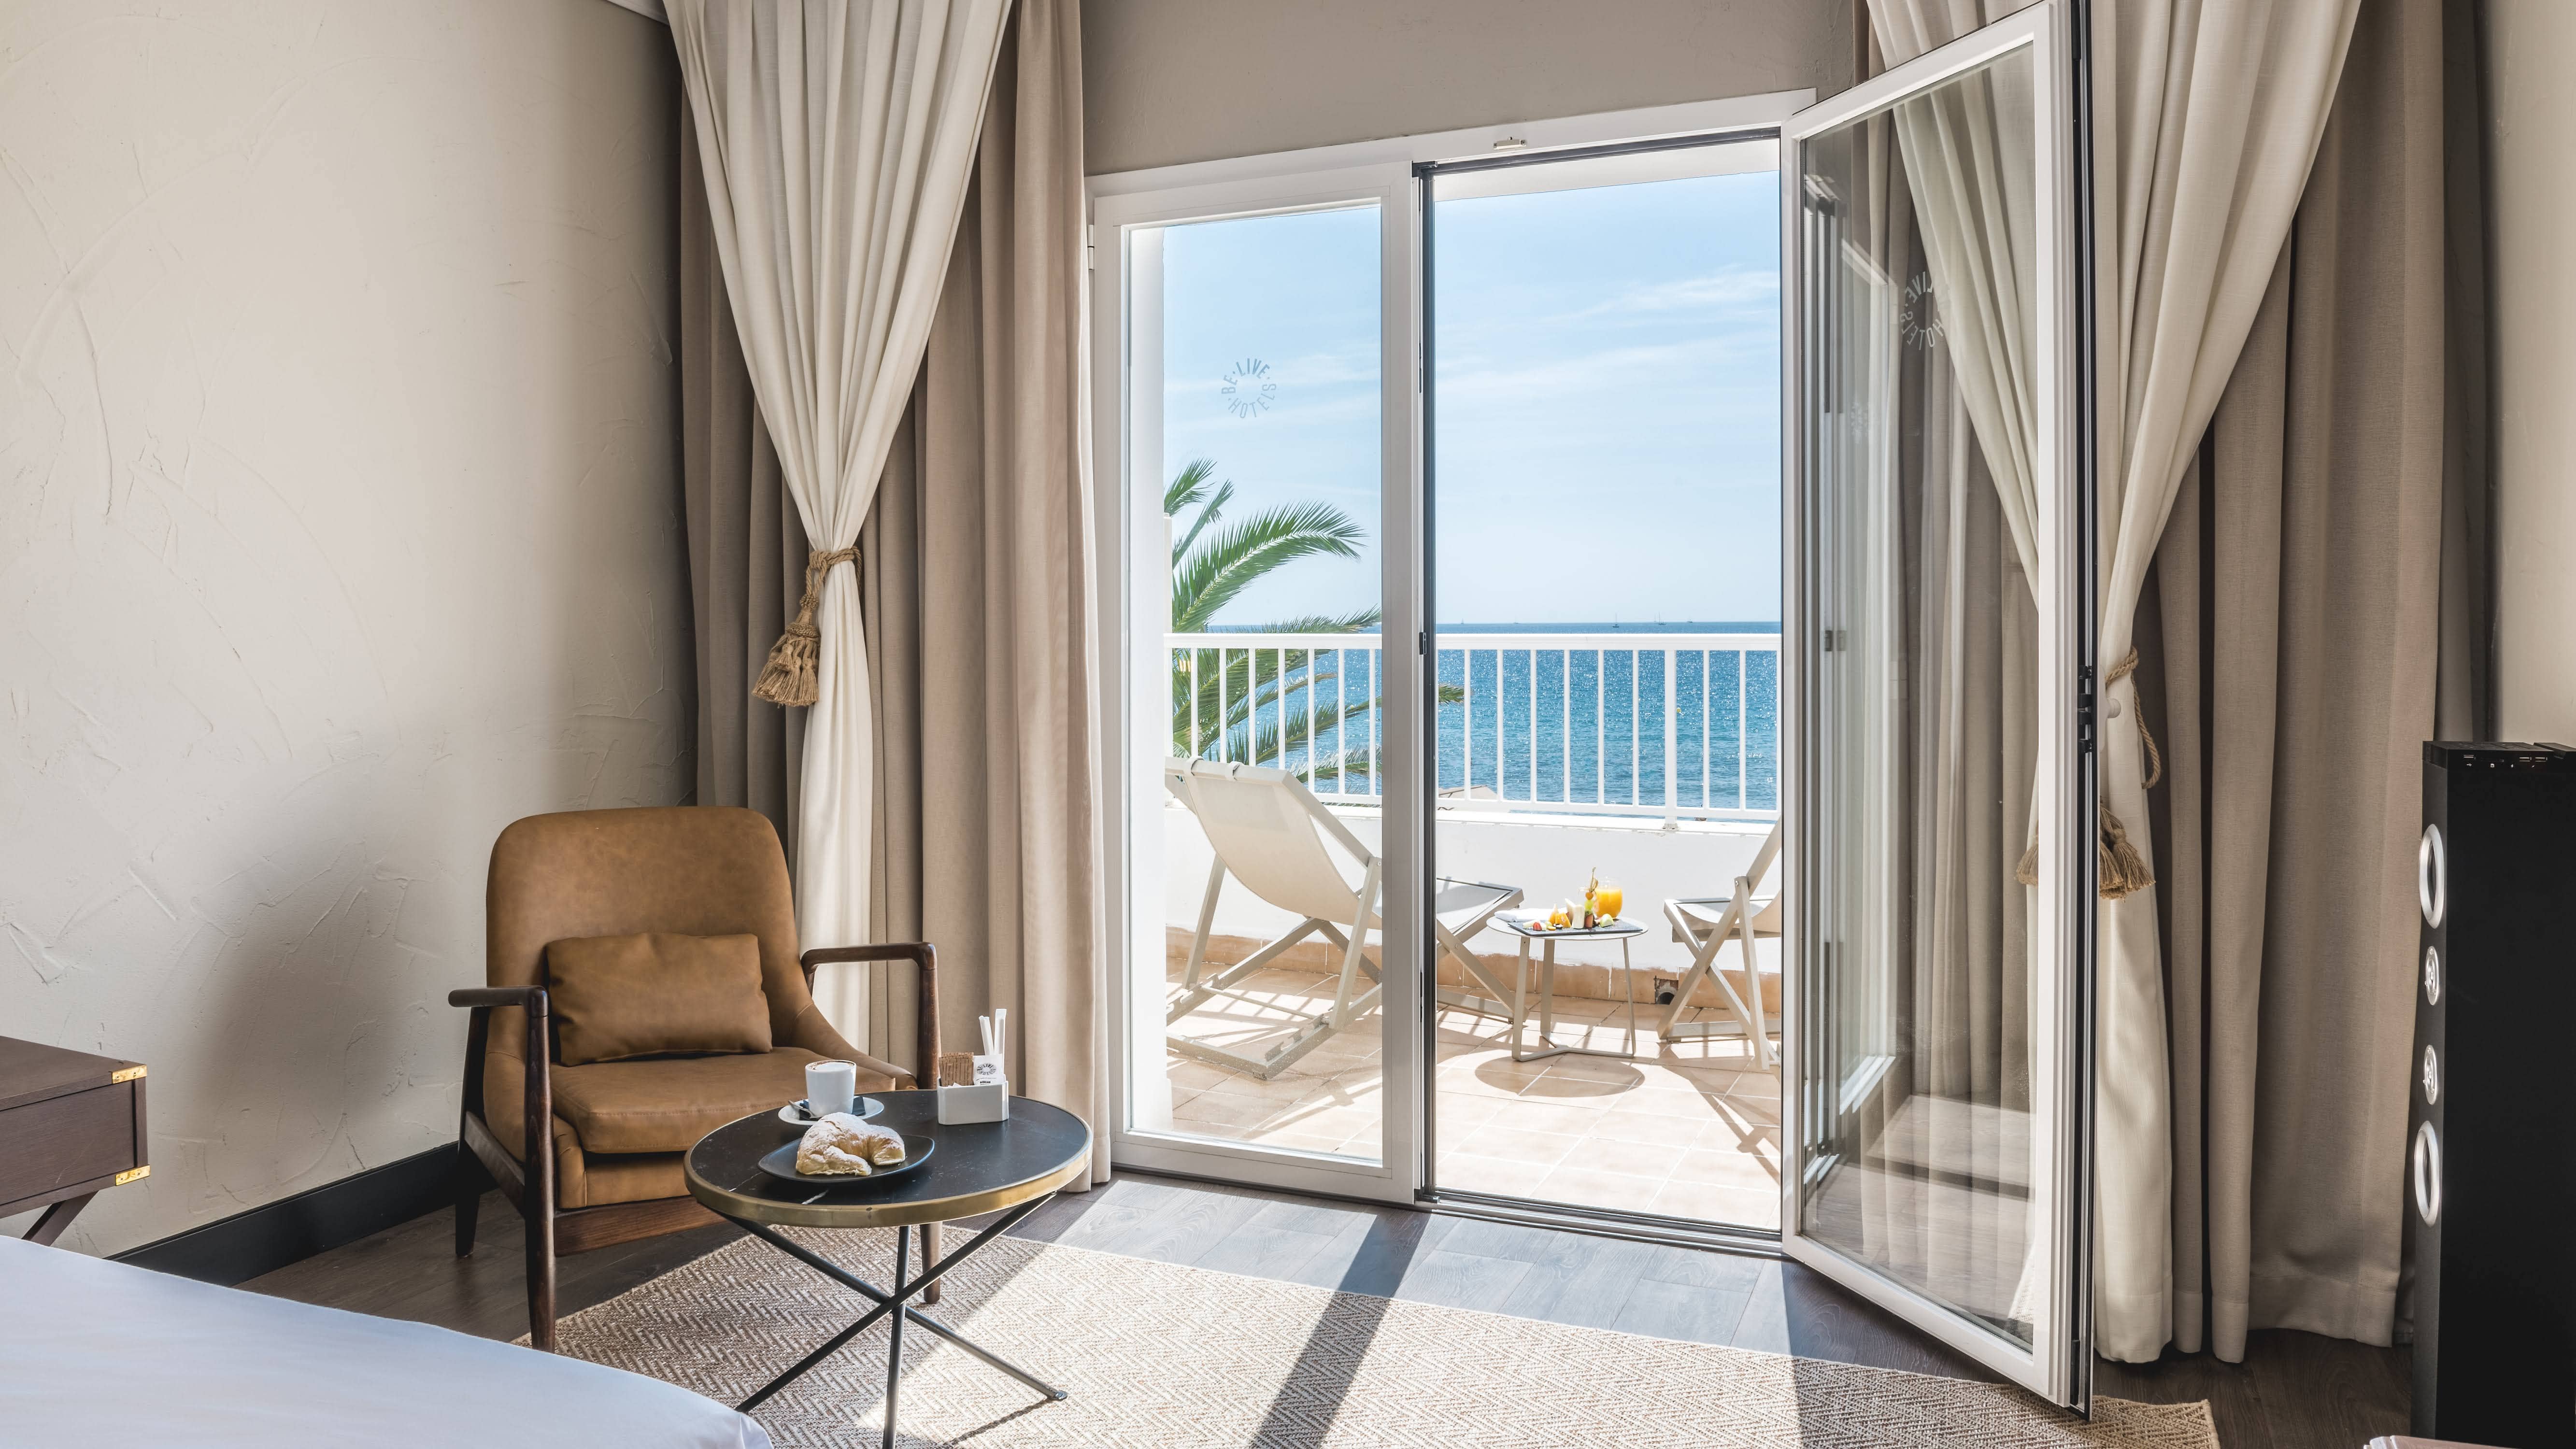 Be Live Adults Only La Cala Boutique Hotel